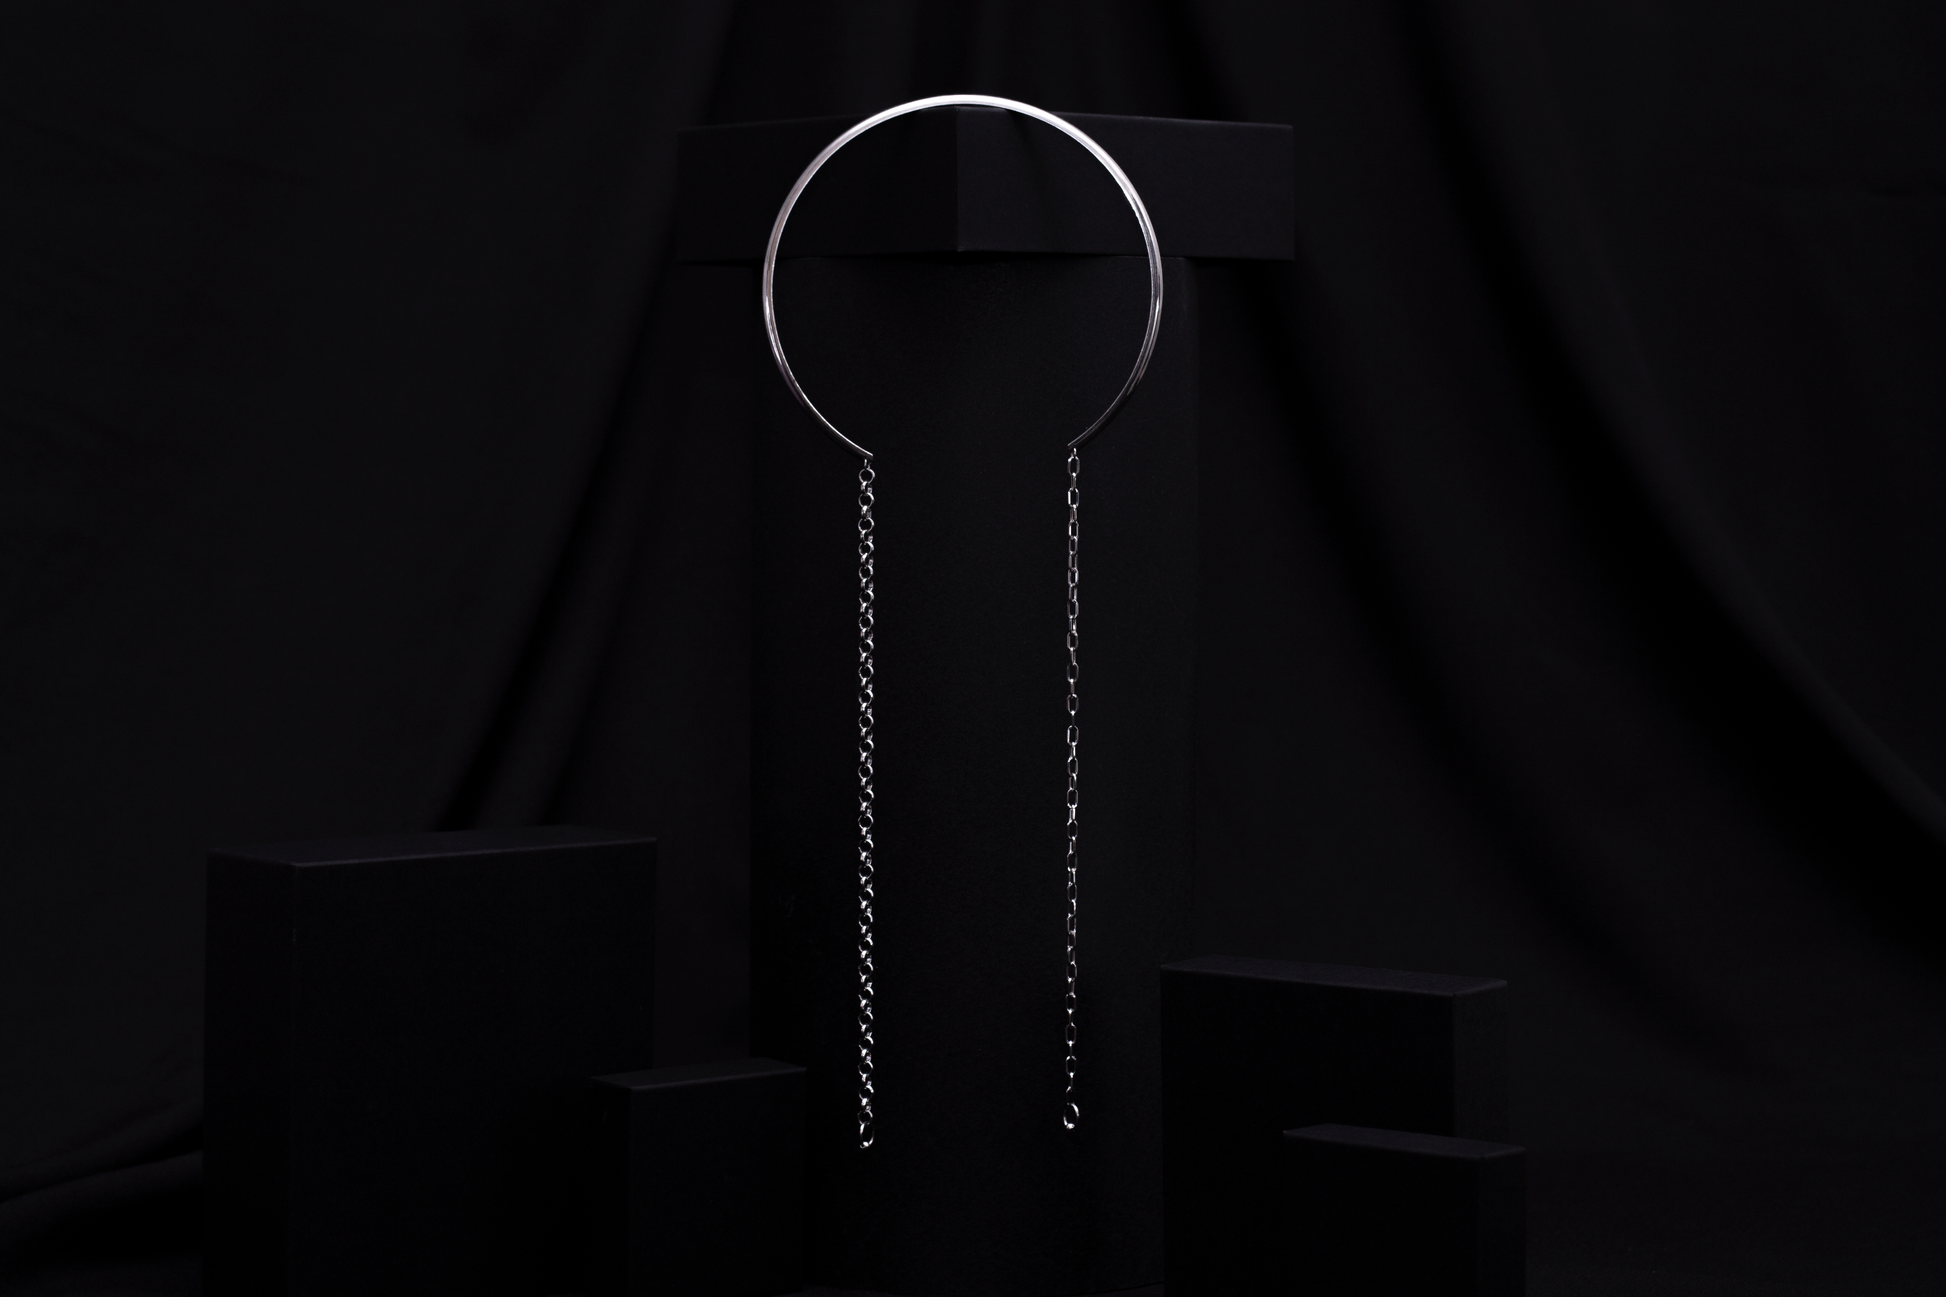 Displayed against a black backdrop, this Myril Jewels piece features a rigid, minimal necklace with long hanging chains, encapsulating the essence of minimal goth. This refined item is ideal for adding an avant-garde touch to any outfit, suitable for everyday wear or as a distinctive accessory for special events like festivals.